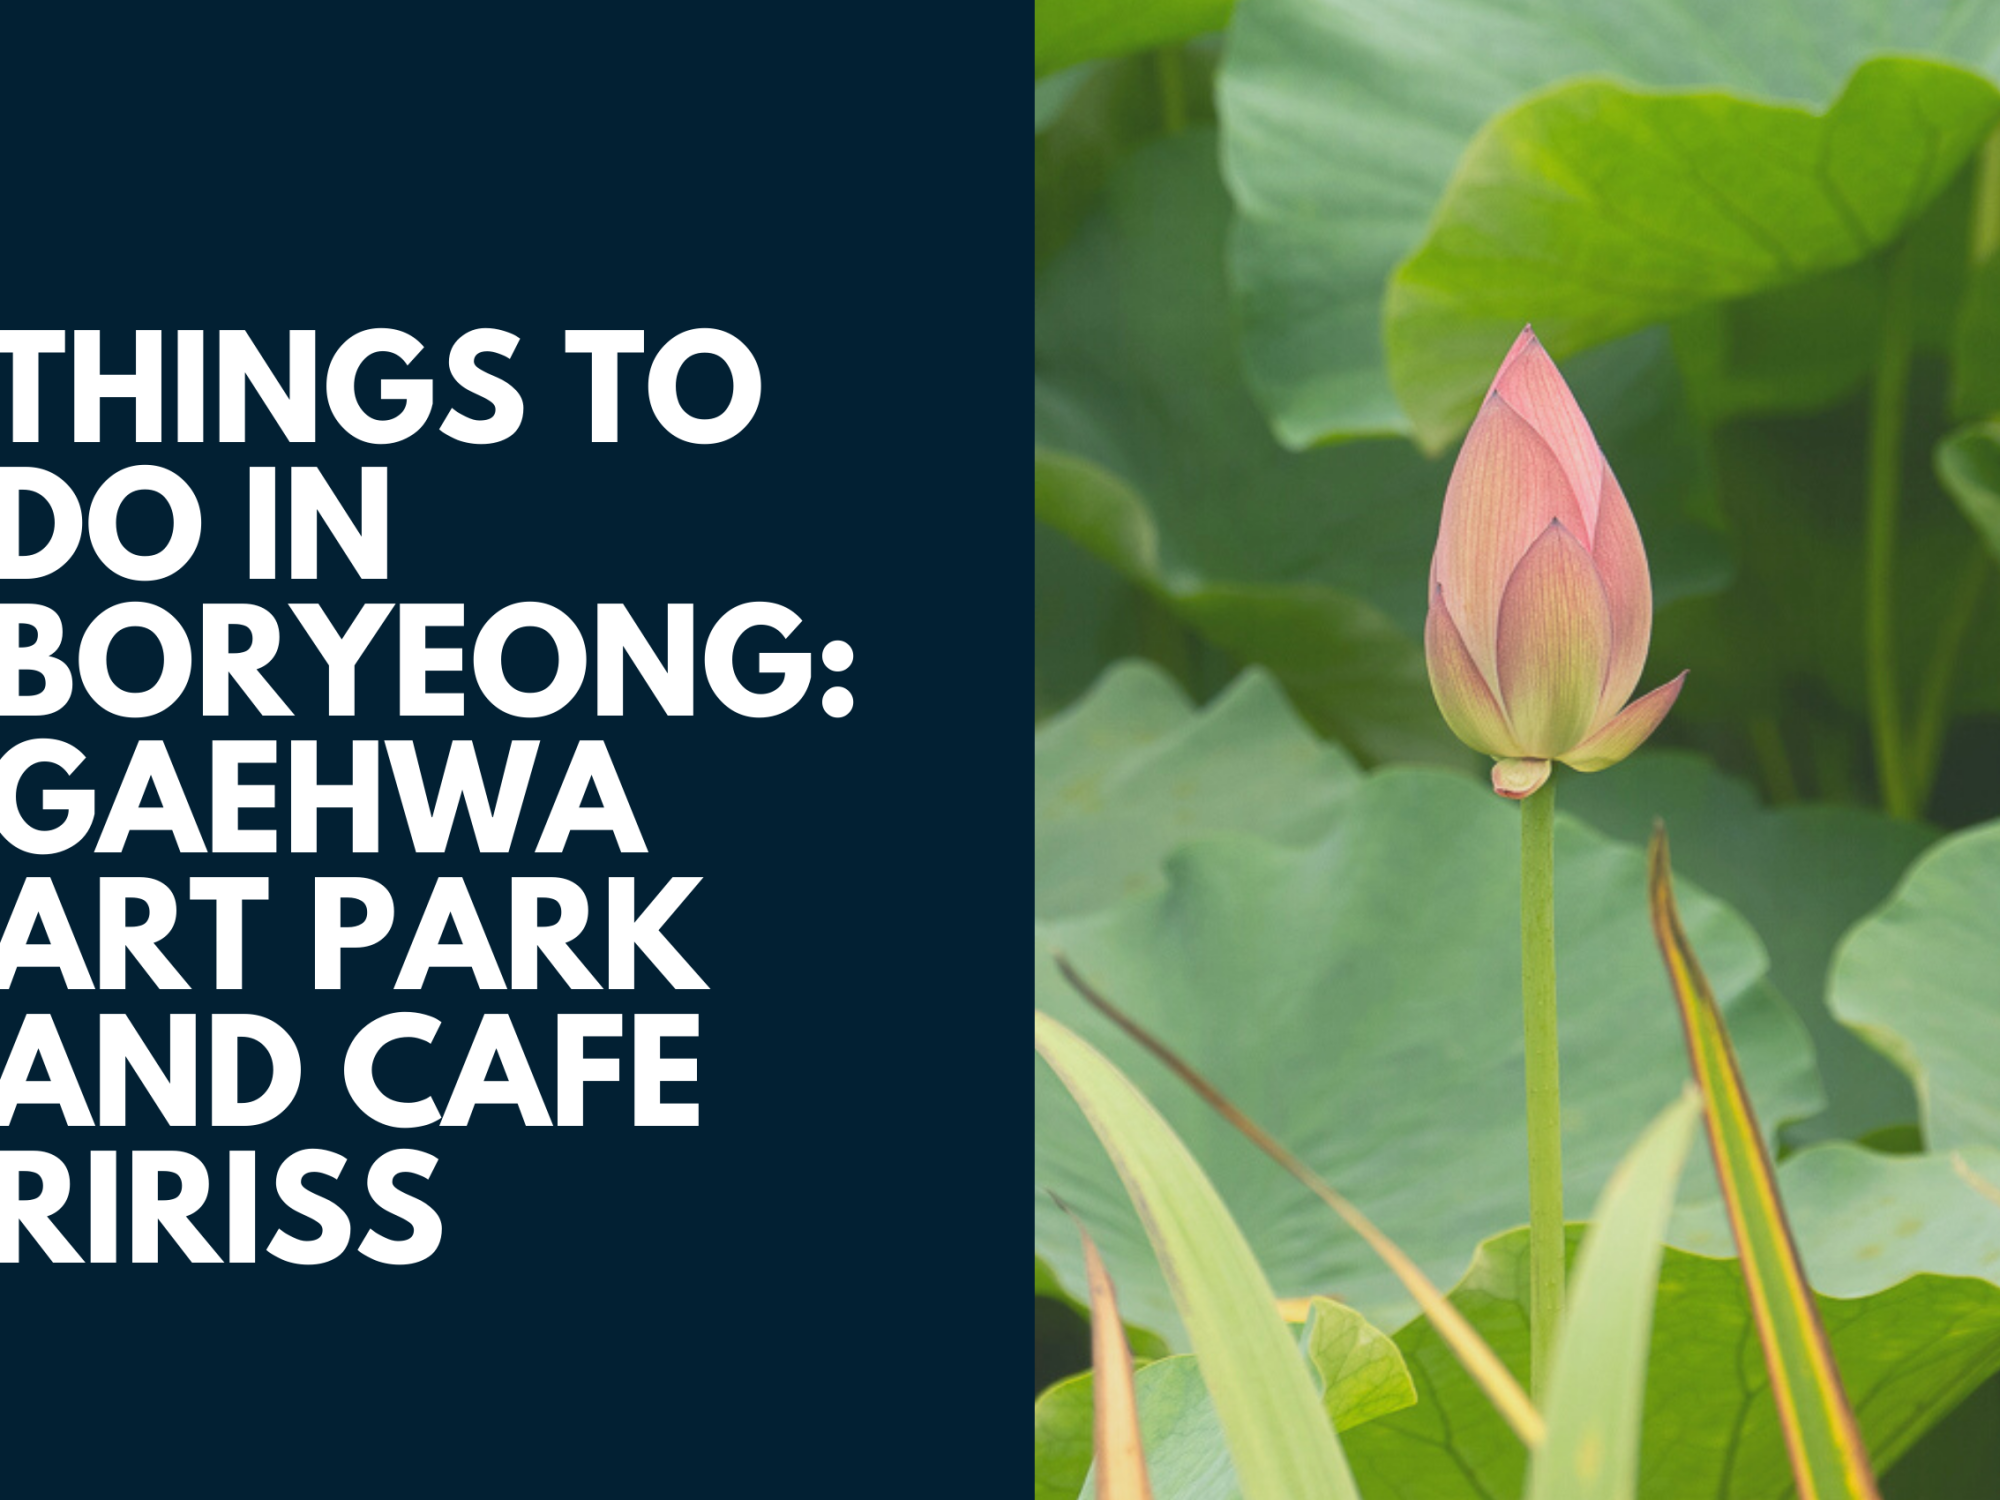 Things to do in Boryeong: Gaehwa Art Park and Cafe Ririss